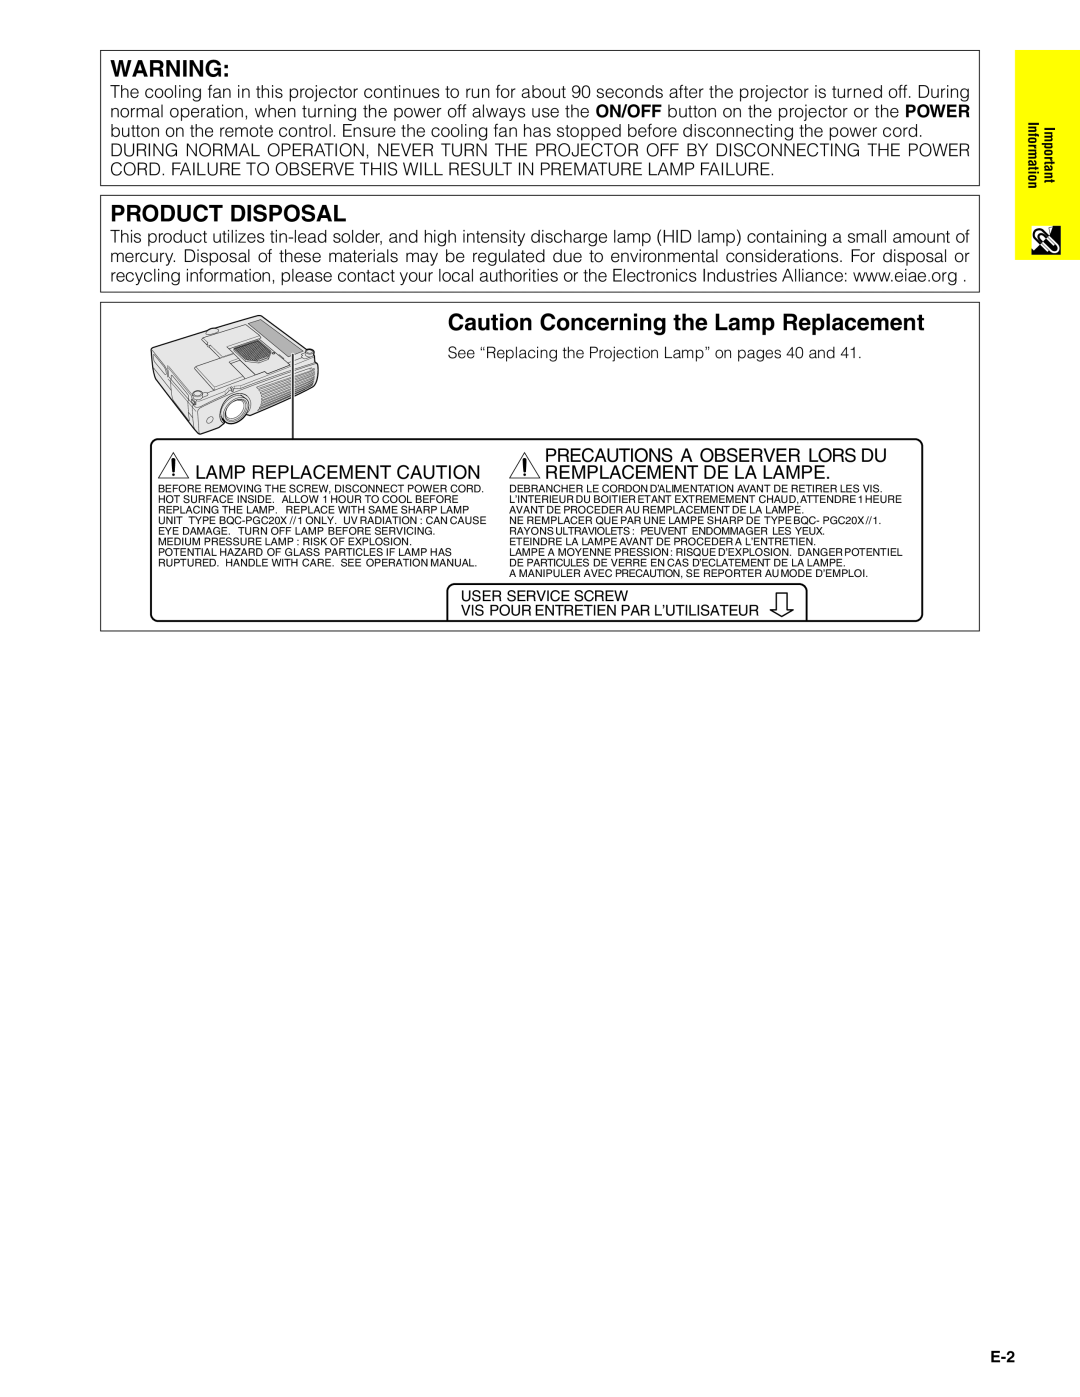 Sharp PG-C20XU operation manual Product Disposal, Caution Concerning the Lamp Replacement, Precautions A Observer Lors Du 